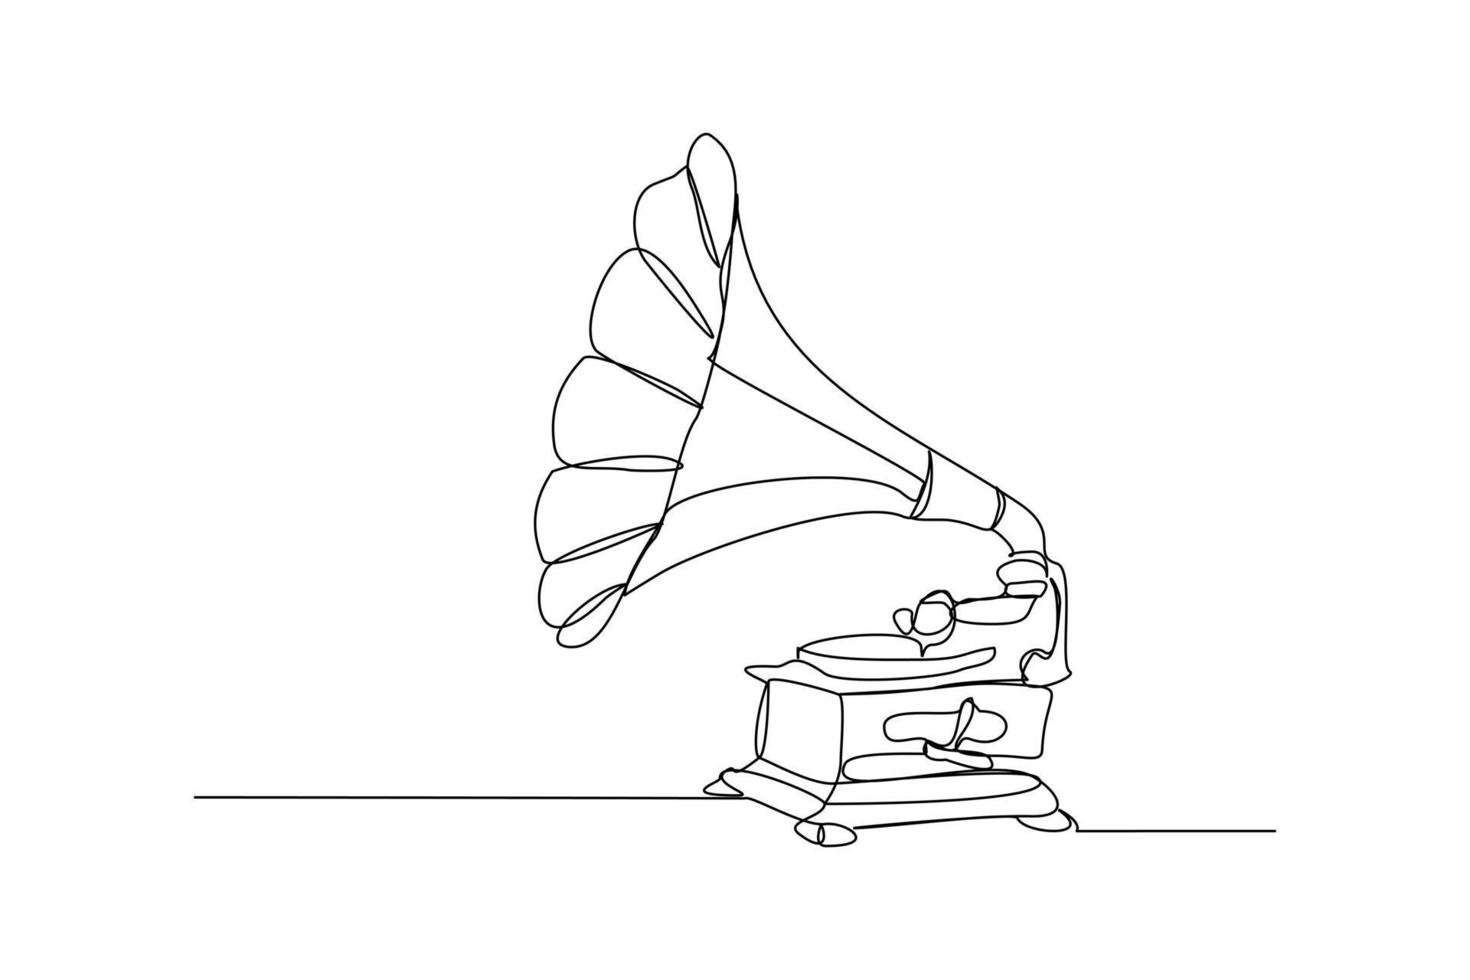 Continuous line drawing of old retro analog gramophone with vinyl desk. Single one line art of antique vintage music player concept. Musical instrument design vector illustration